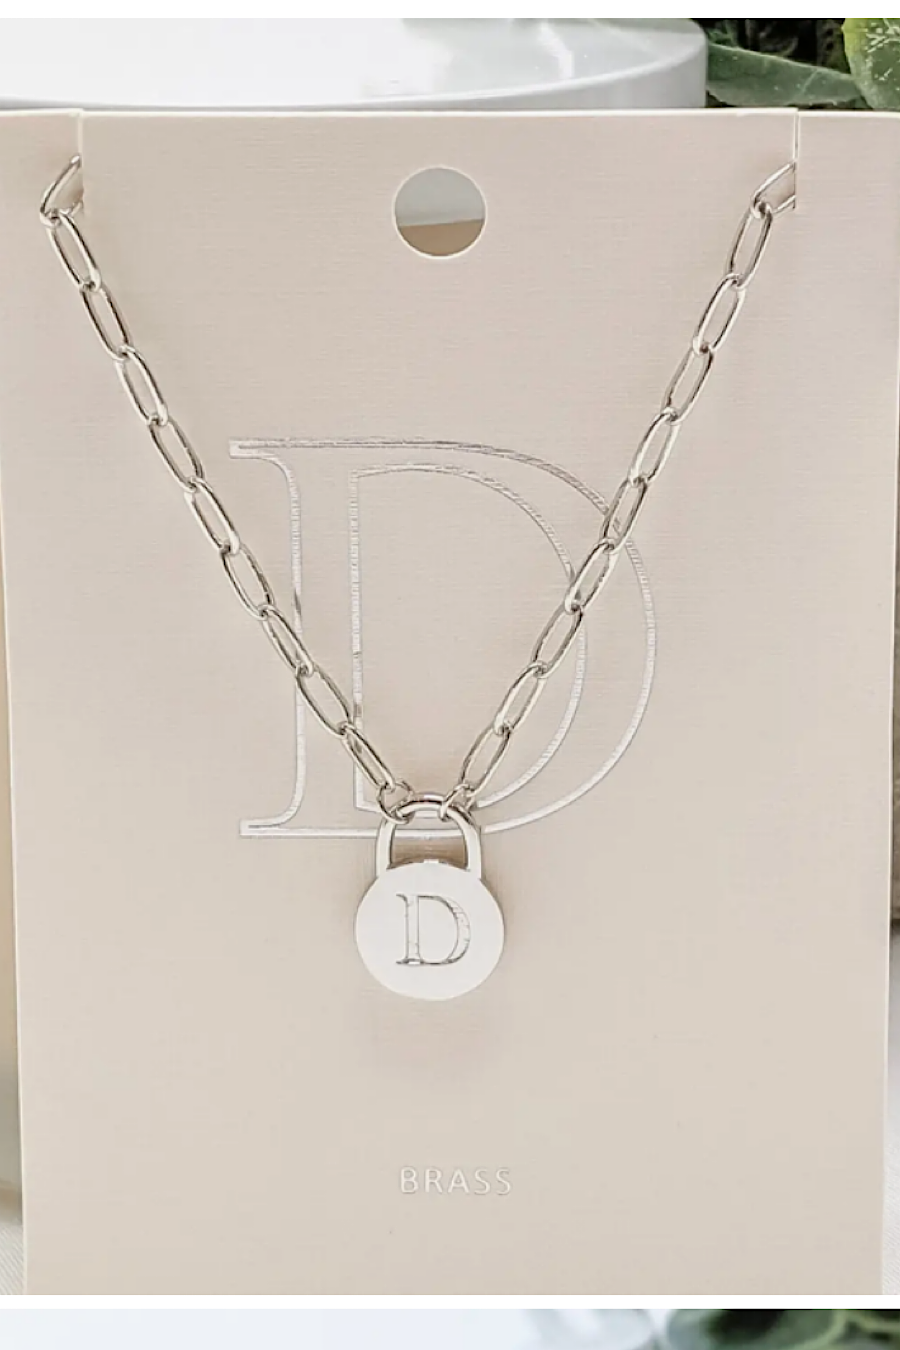 Initial Lock Pendant Necklace Silver